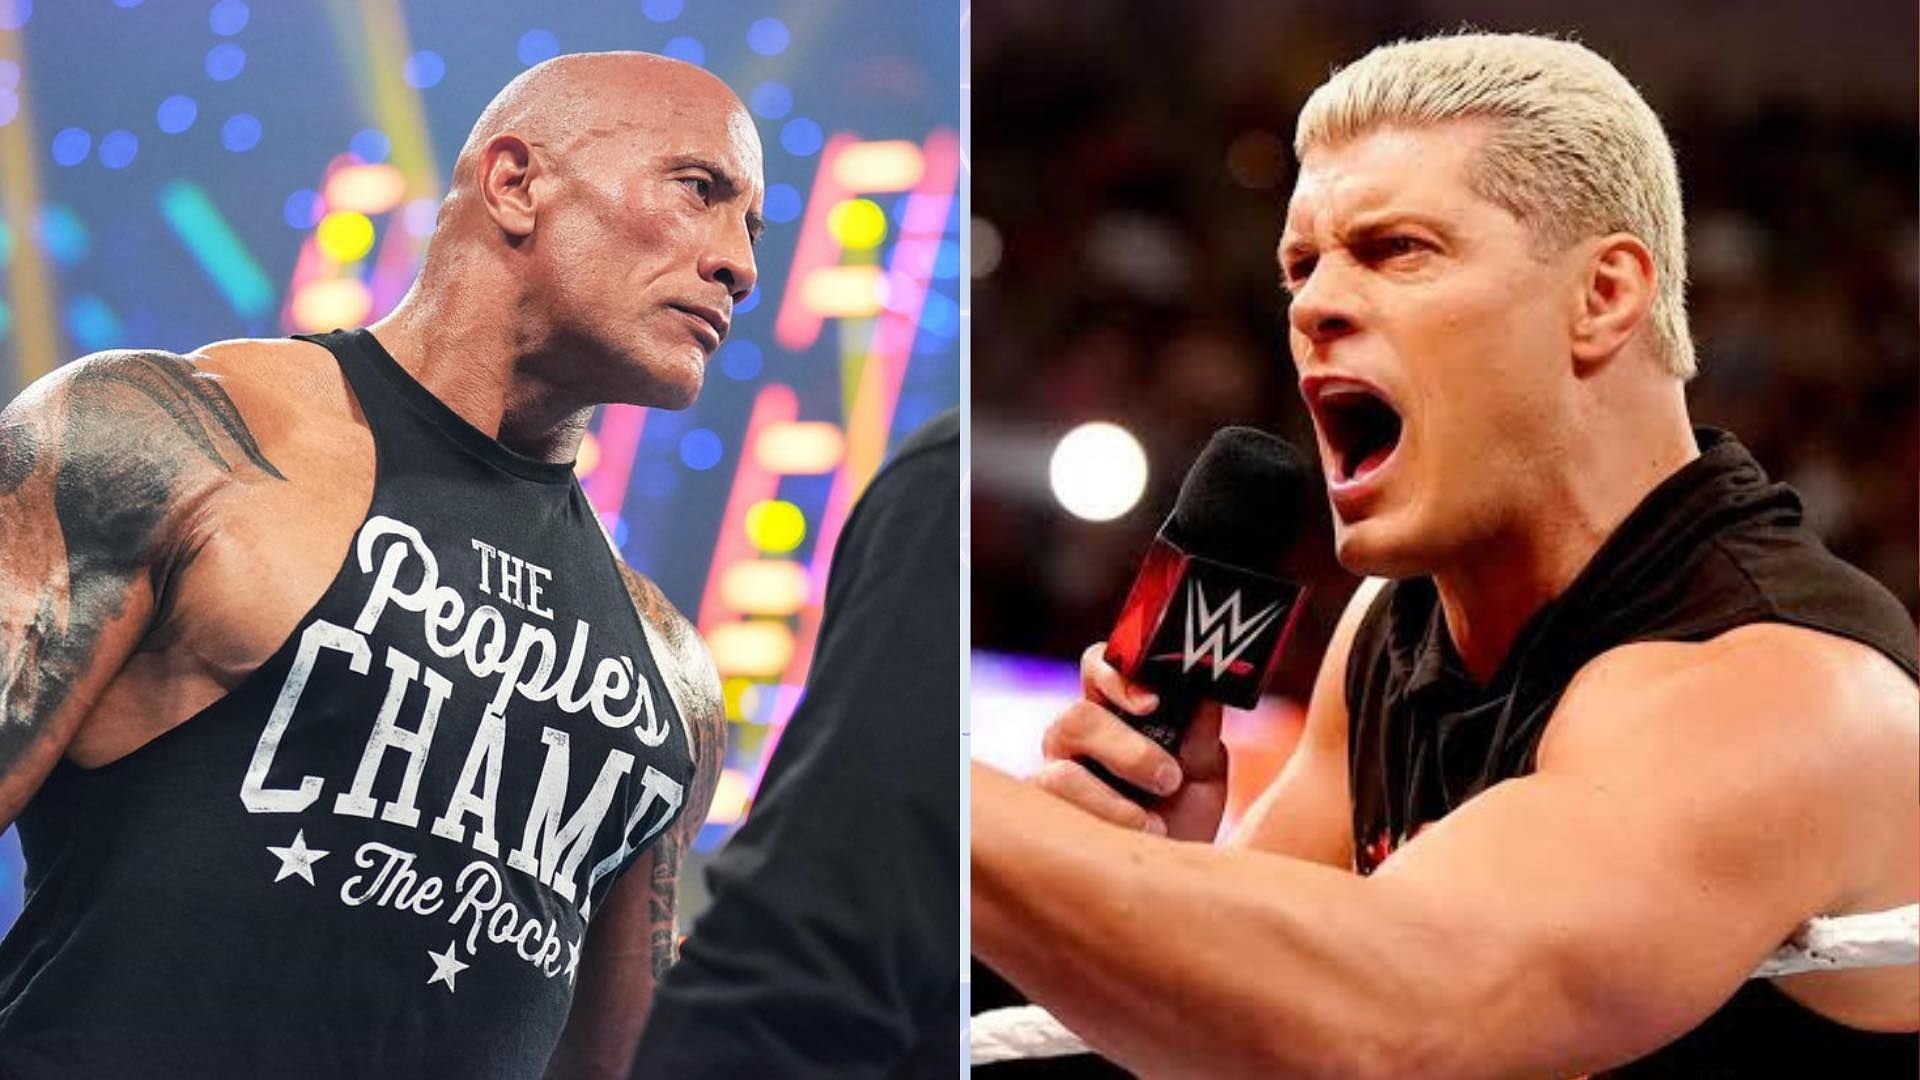 The Rock (left), Cody Rhodes (right)